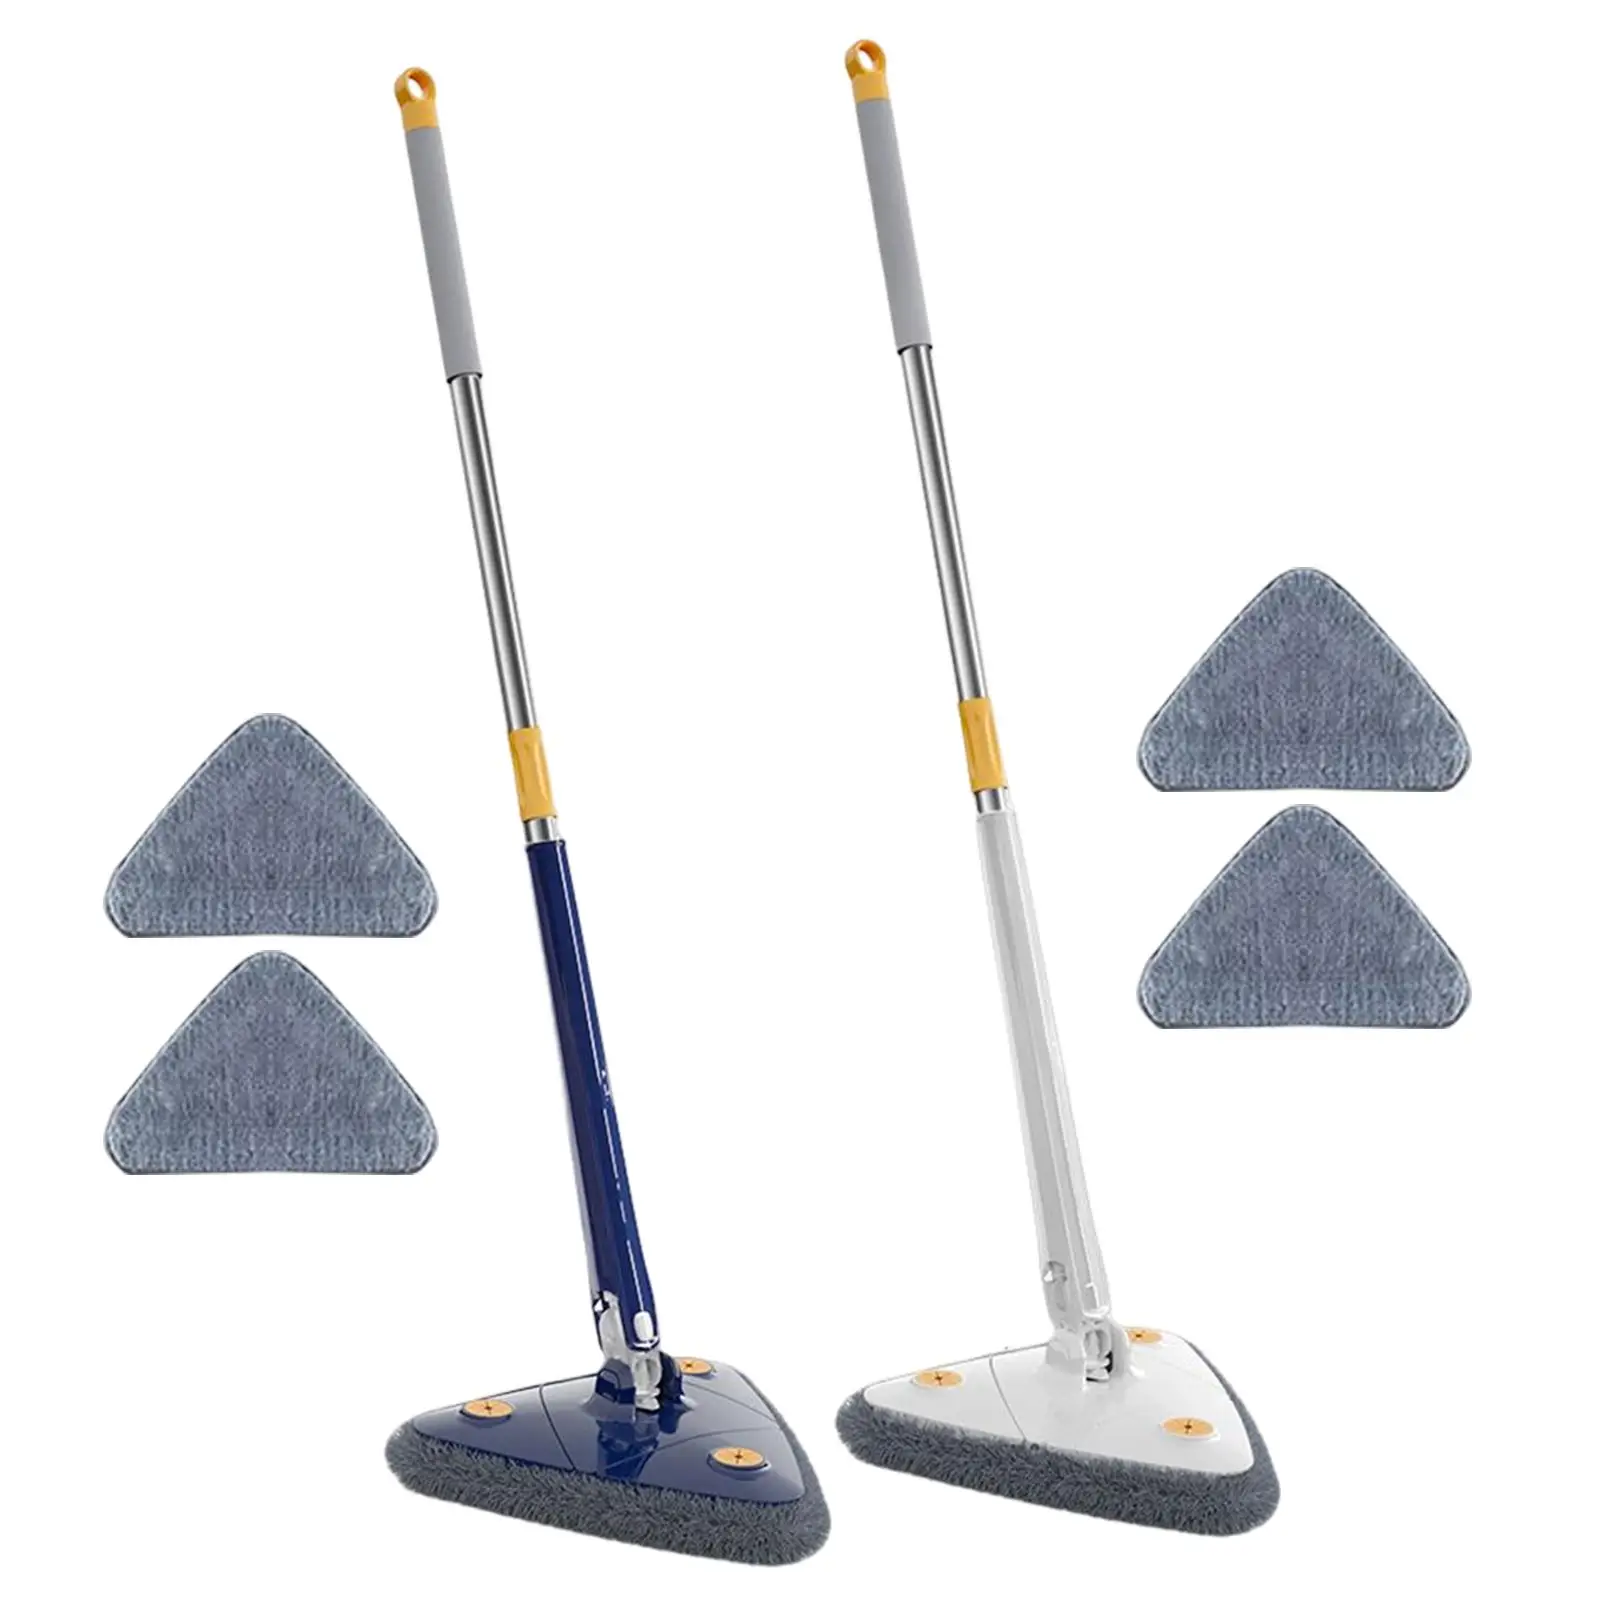 Rotatable Triangle Floor Mop with 3x Microfiber Pad Reusable Washable Adjustable Wood Wall Bathroom Cleaning